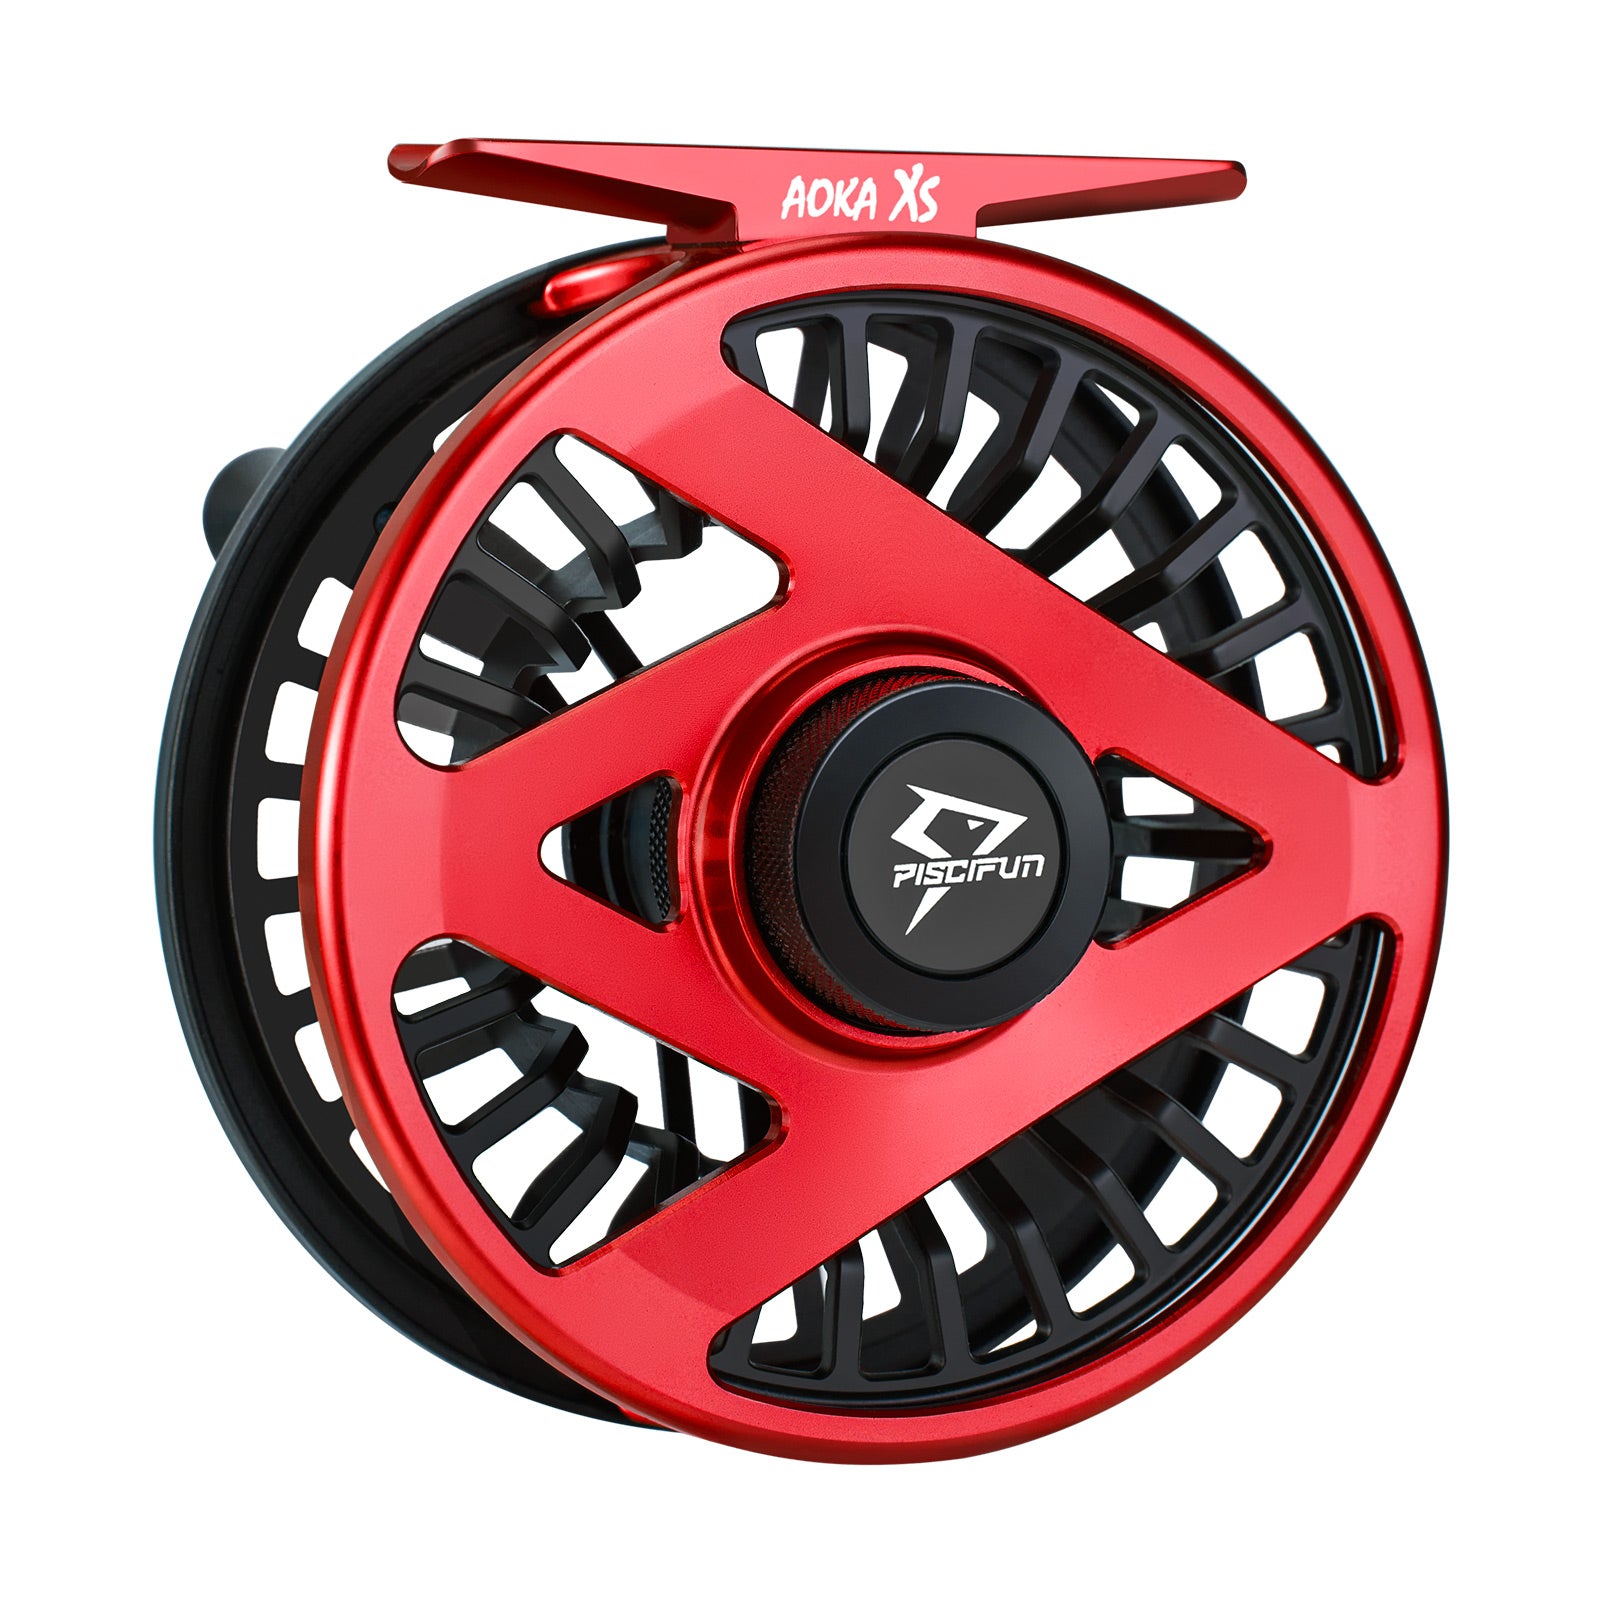 Piscifun® Aoka XS Fly Fishing Reel with Sealed Drag, CNC-machined